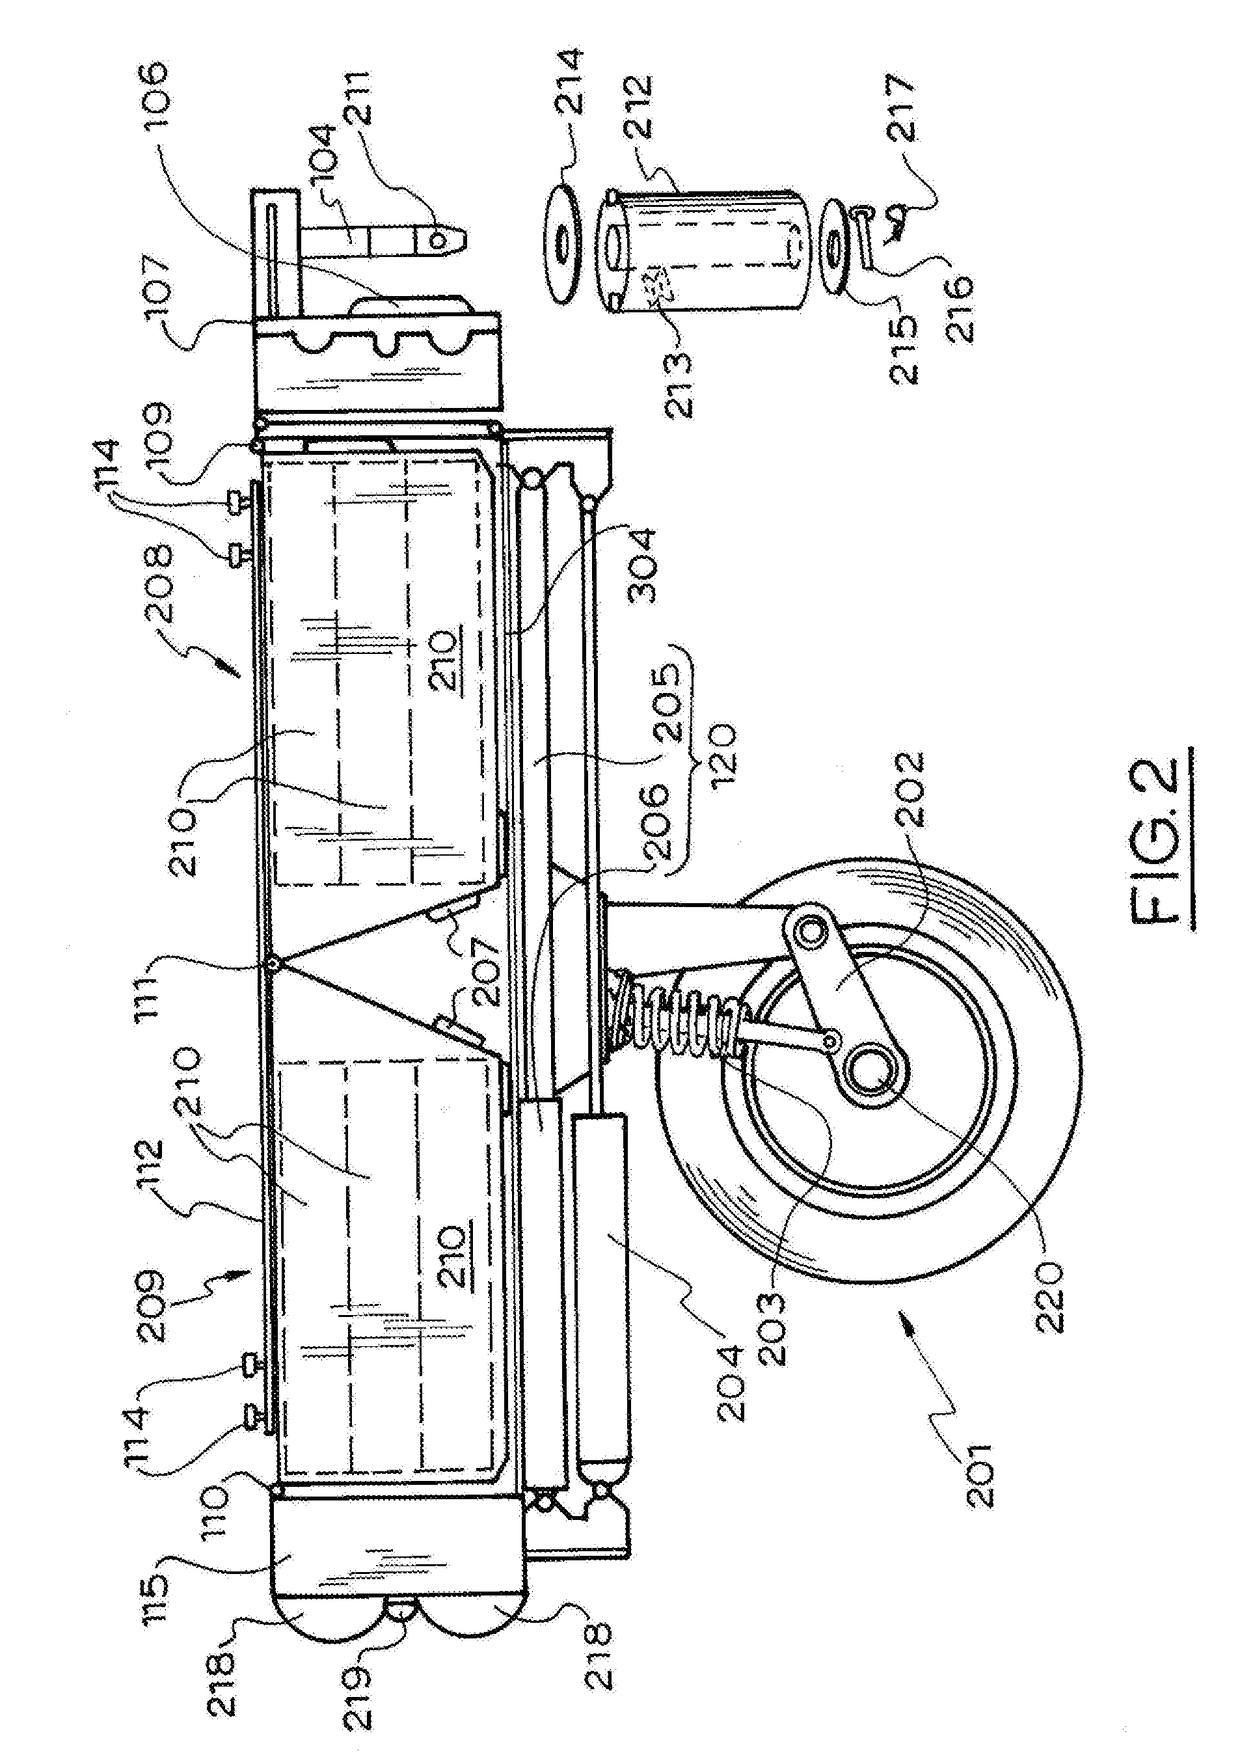 An apparatus and system for providing a secondary power source for an electric vehicle